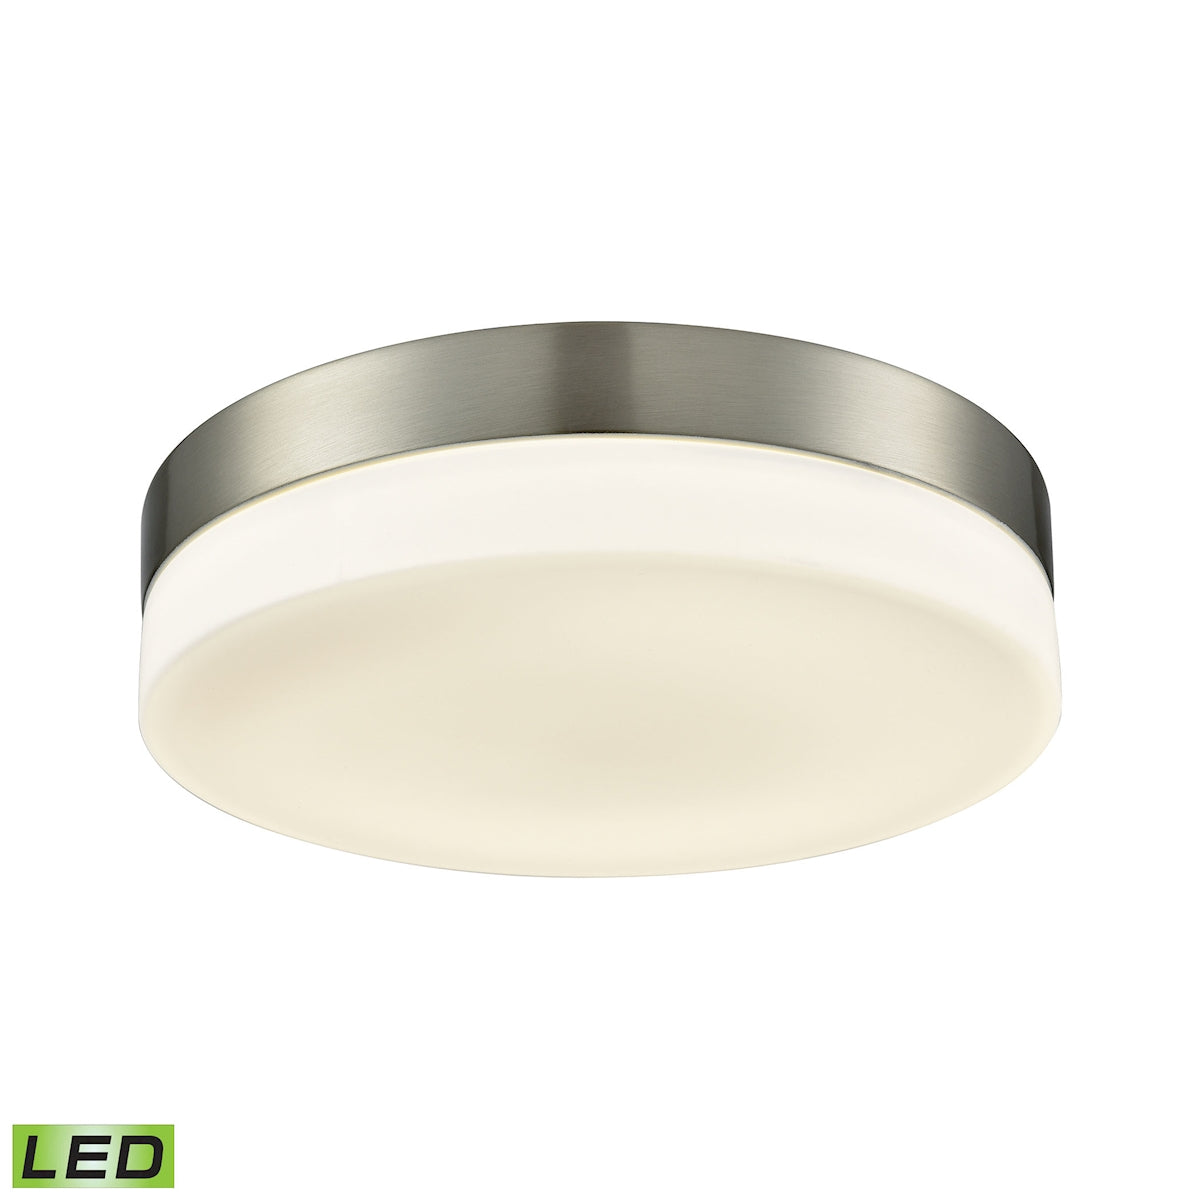 ELK Lighting FML4075-10-16M Holmby 1-Light Round Flush Mount in Satin Nickel with Opal Glass Diffuser - Integrated LED - Large